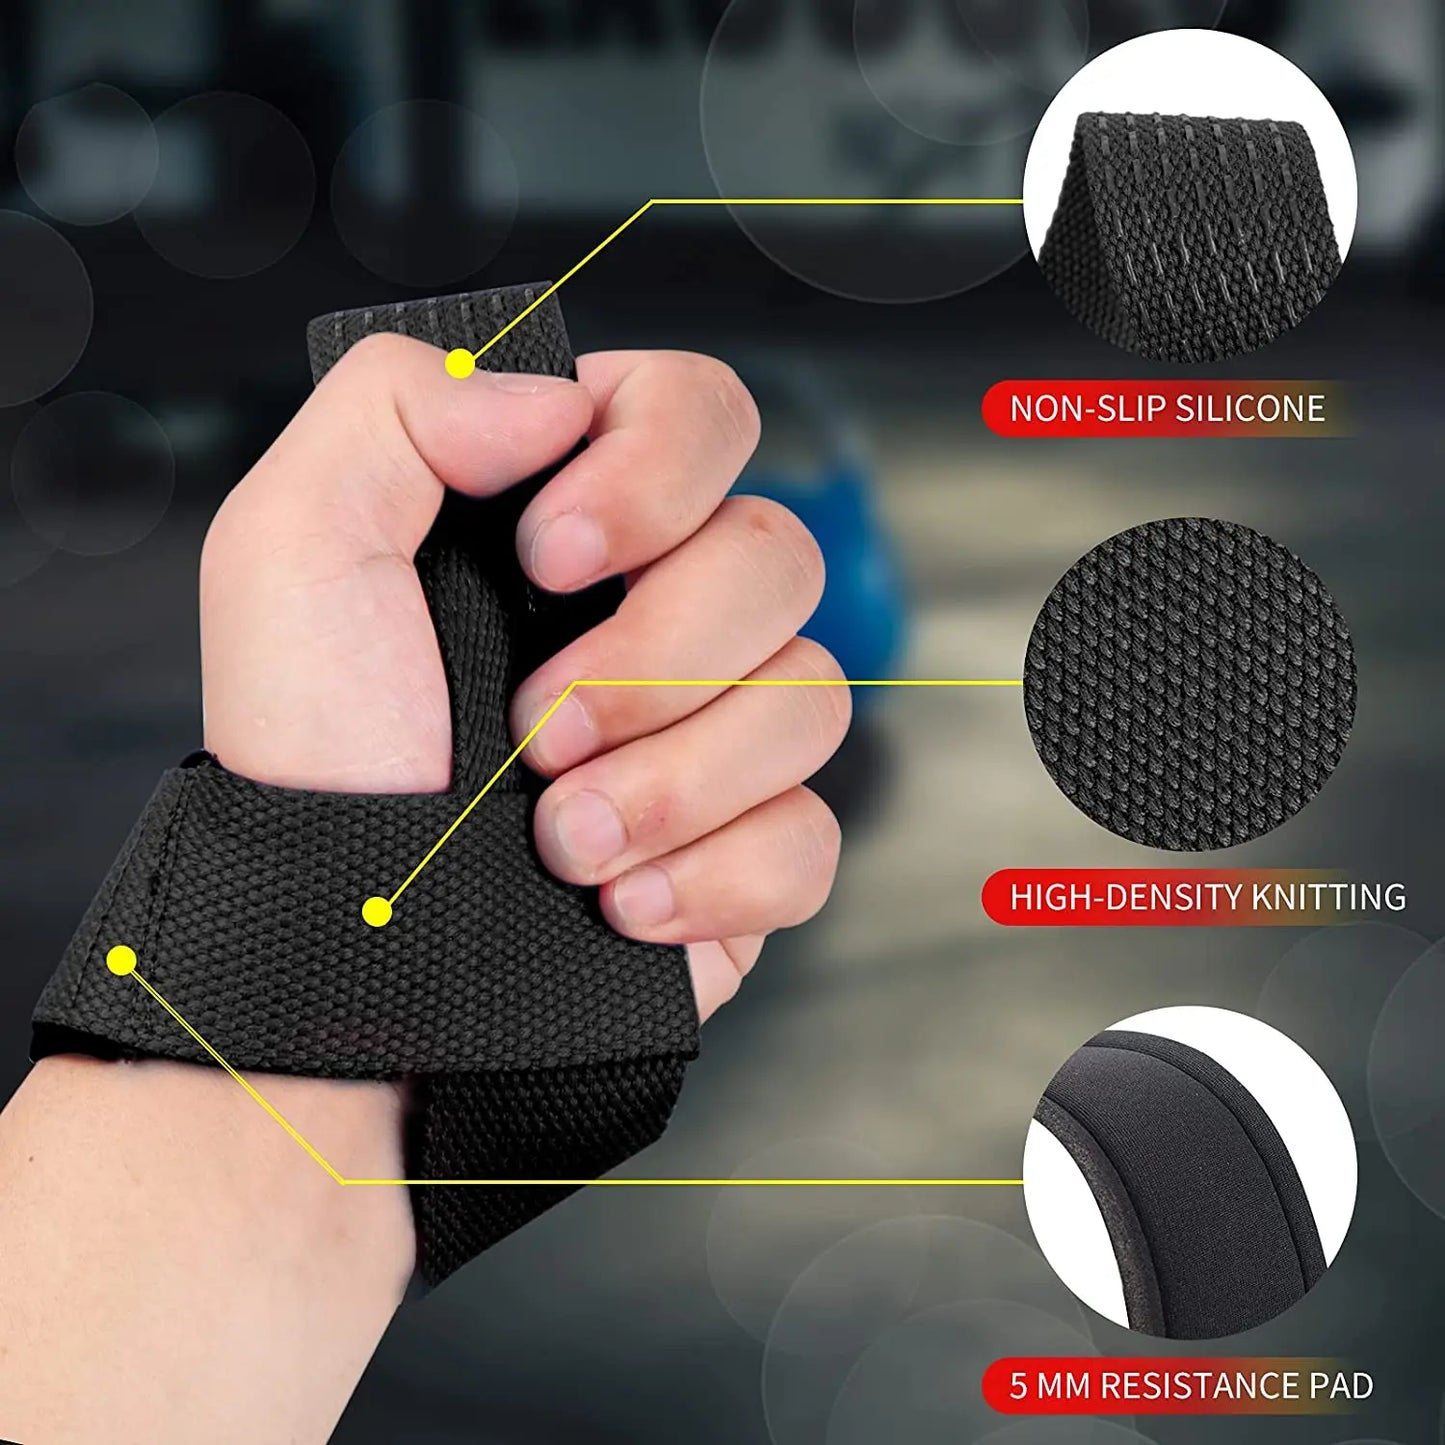 Weightlifting Straps - Anti-Slip Silicone Lifting Wrist Straps for Strength Training, Deadlifts, CrossFit, and Hand Grips Wrist Support